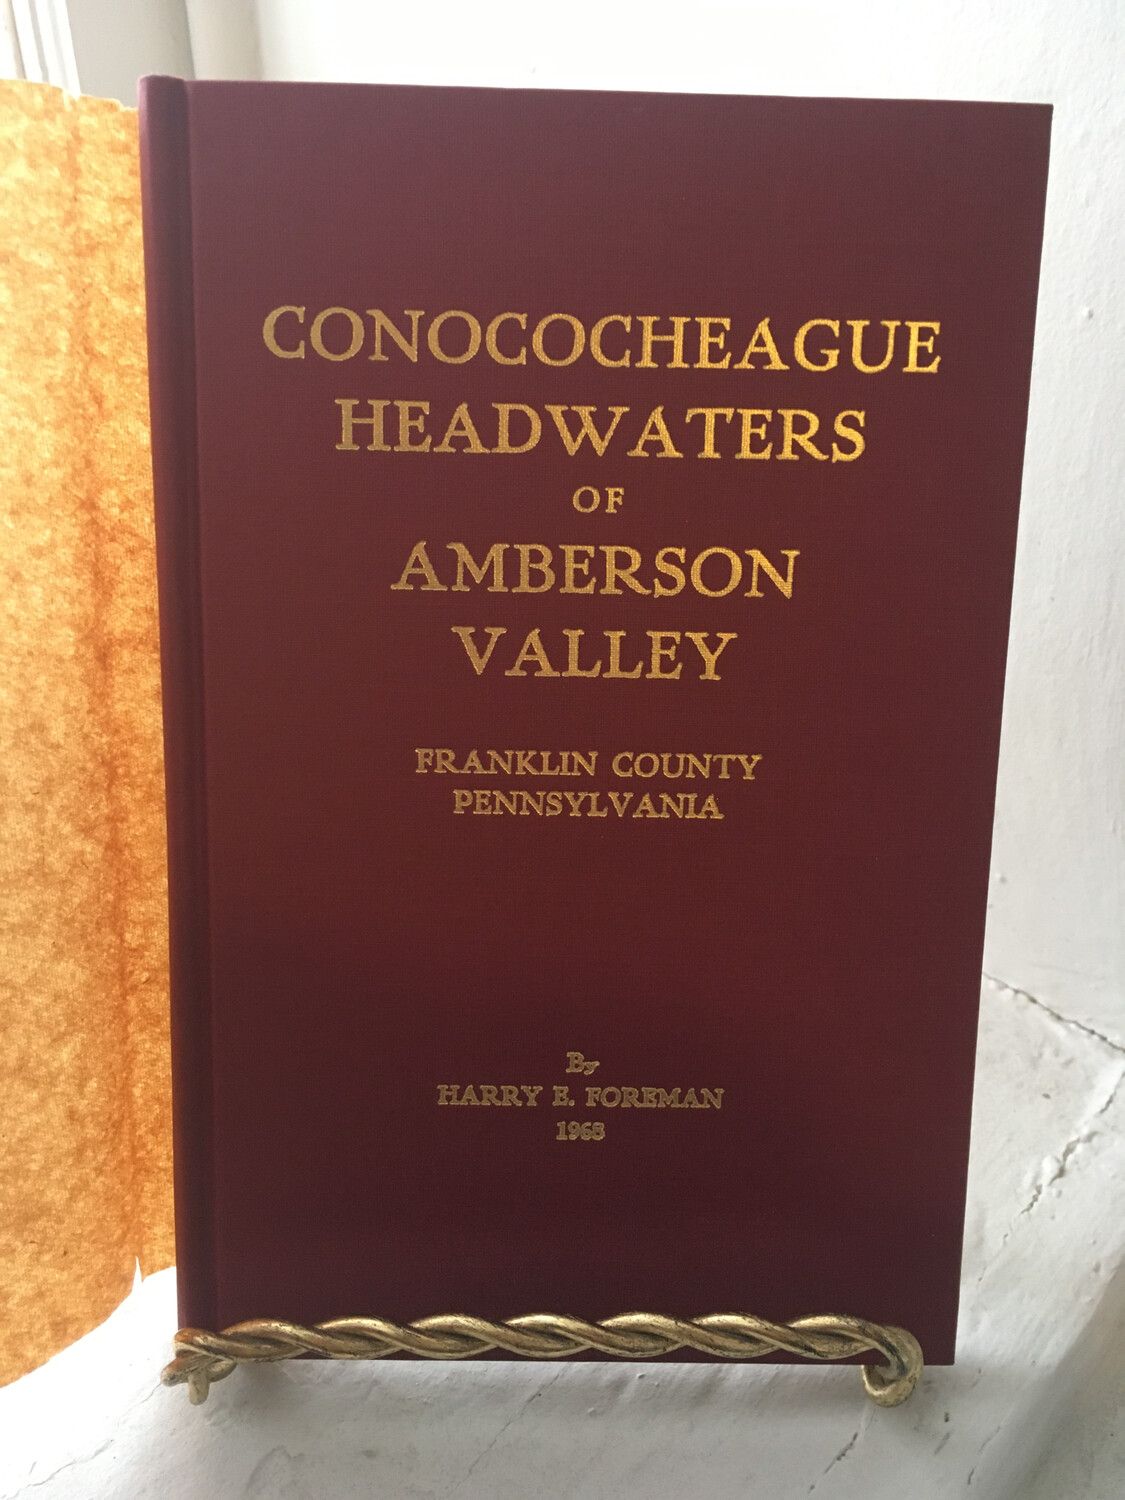 Conococheague Headwaters of Amberson Valley